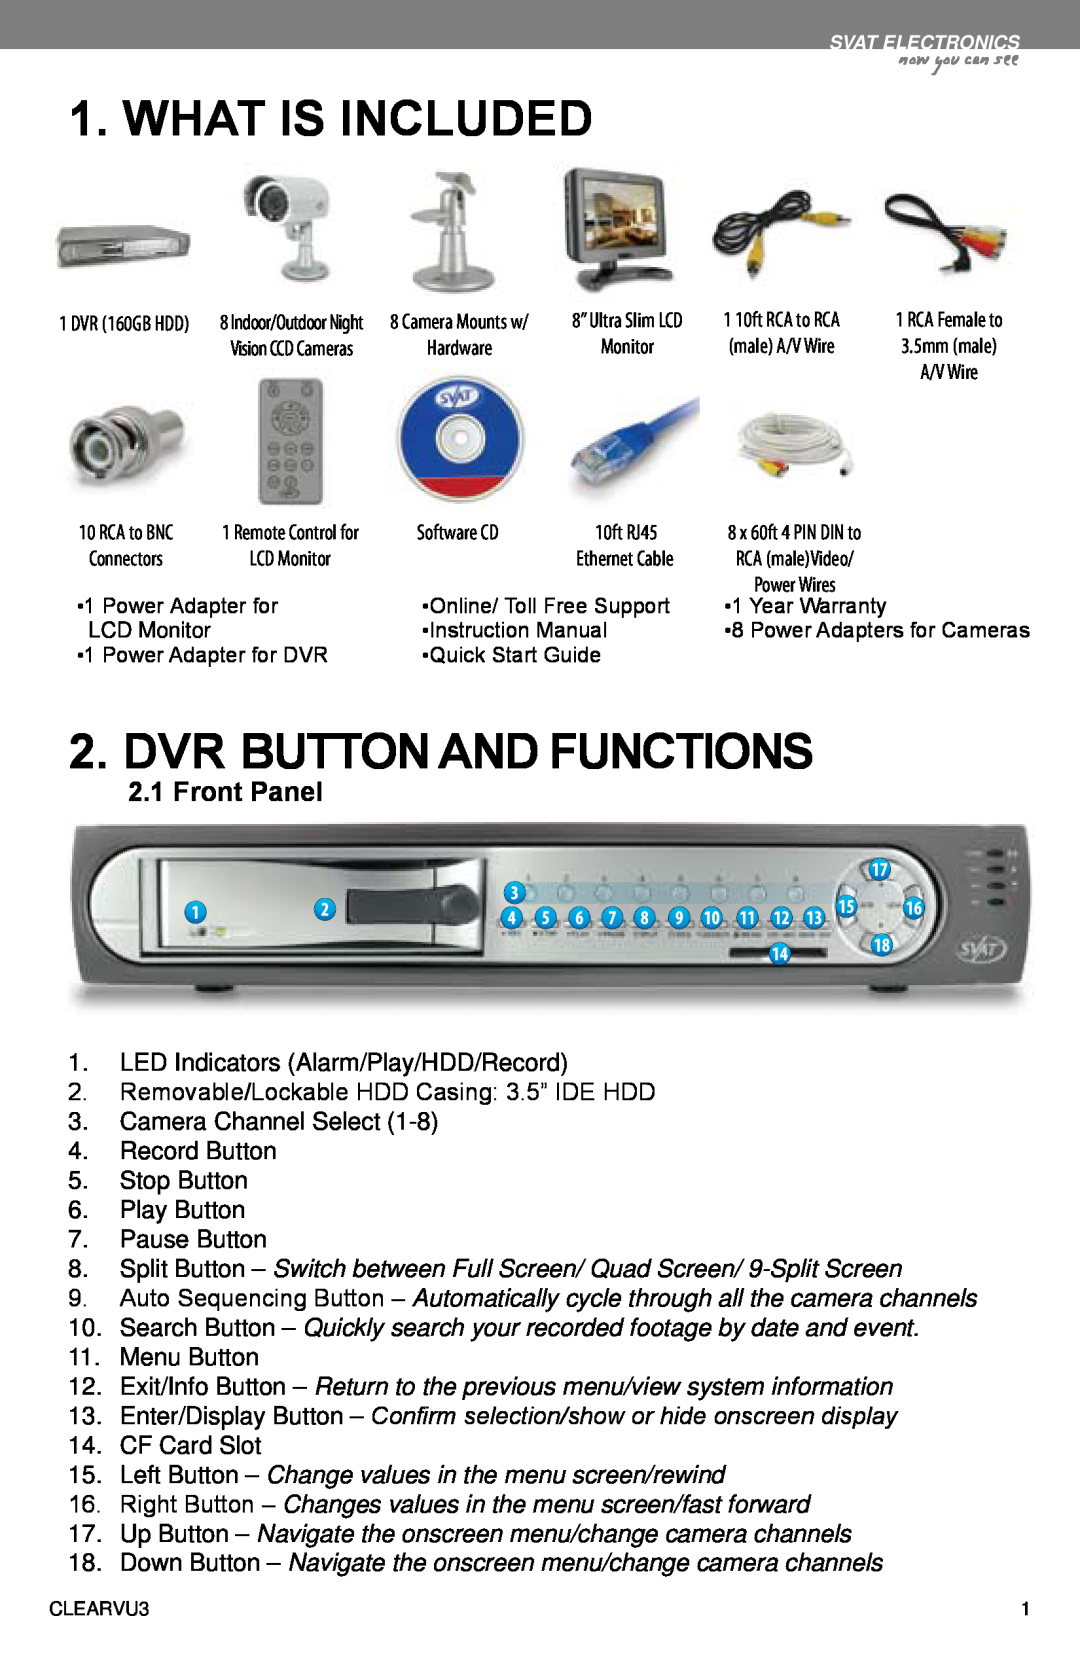 SVAT Electronics CLEARVU3 instruction manual What Is Included, Dvr Button And Functions, 2.1Front Panel, now you can see 